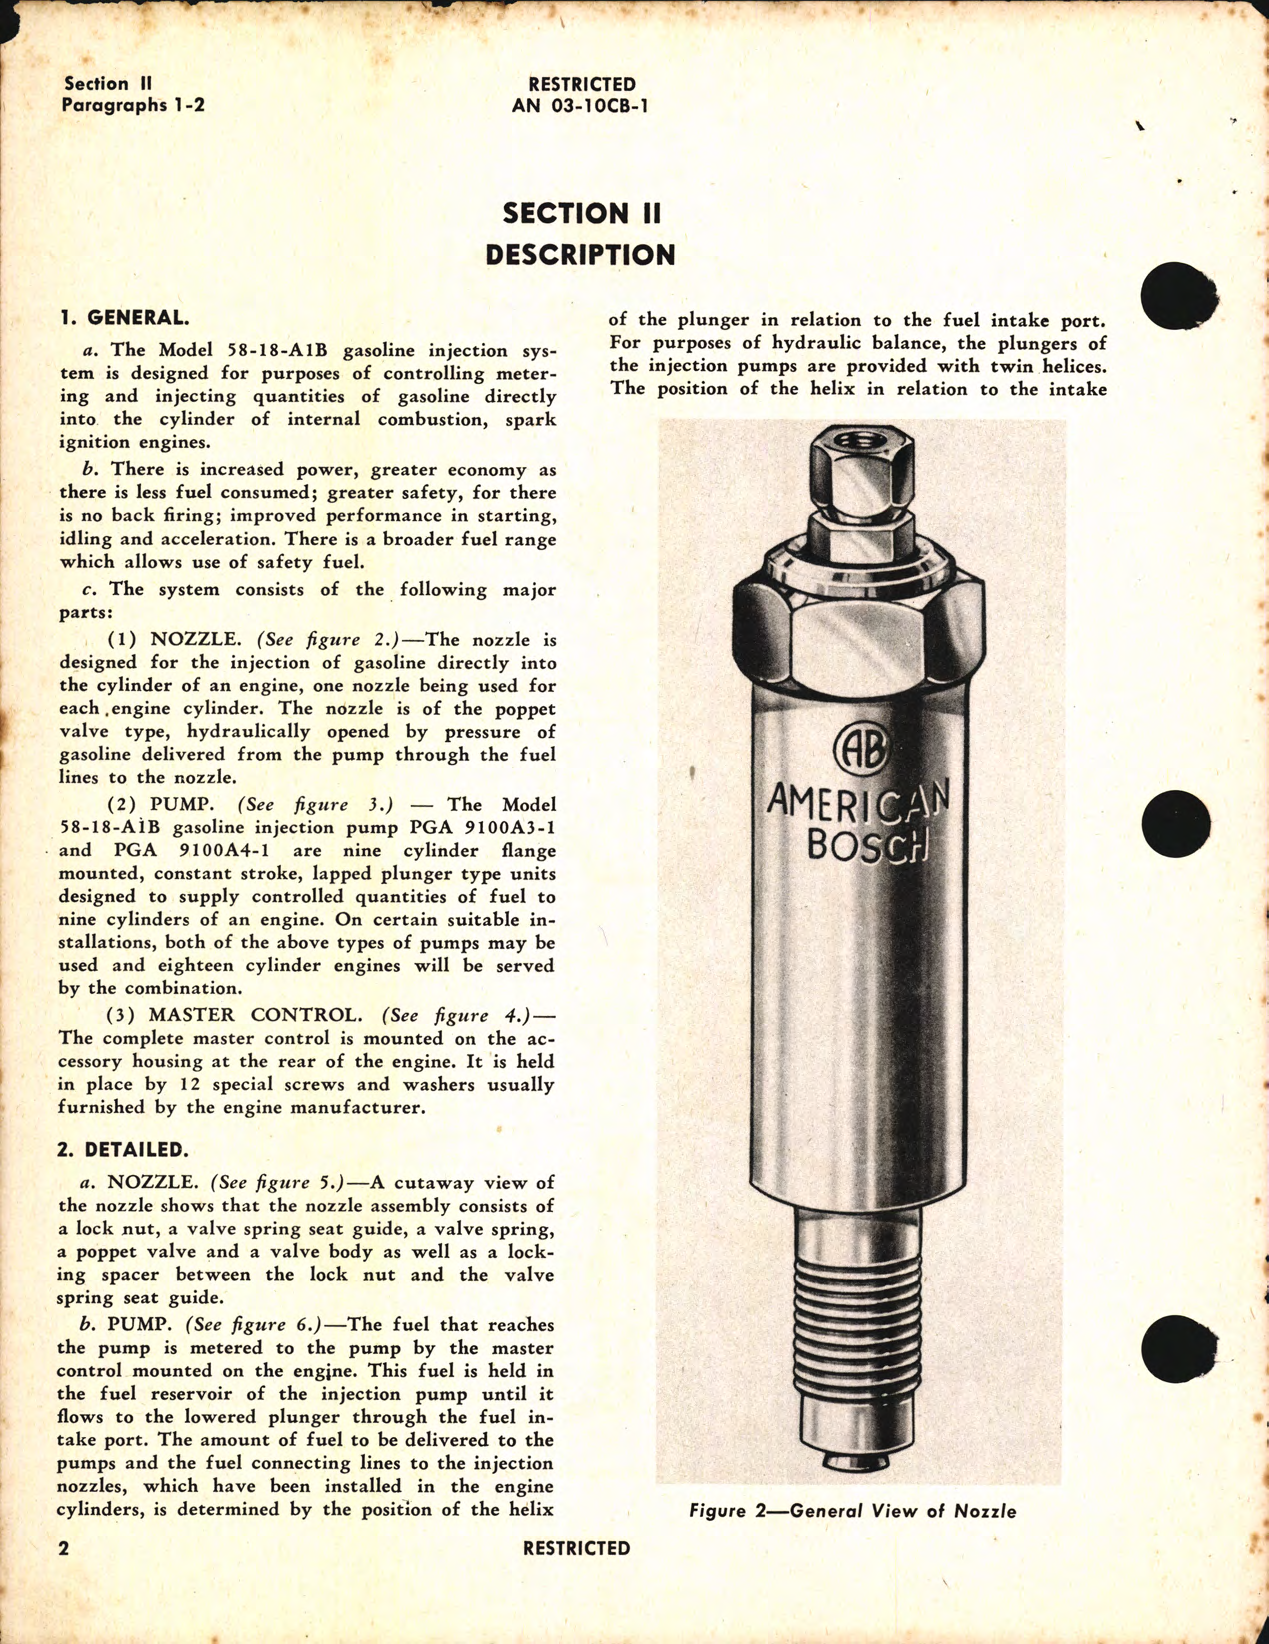 Sample page 6 from AirCorps Library document: Handbook of Instructions with Parts Catalog for Gasoline Injection System Model 58-18-A1B